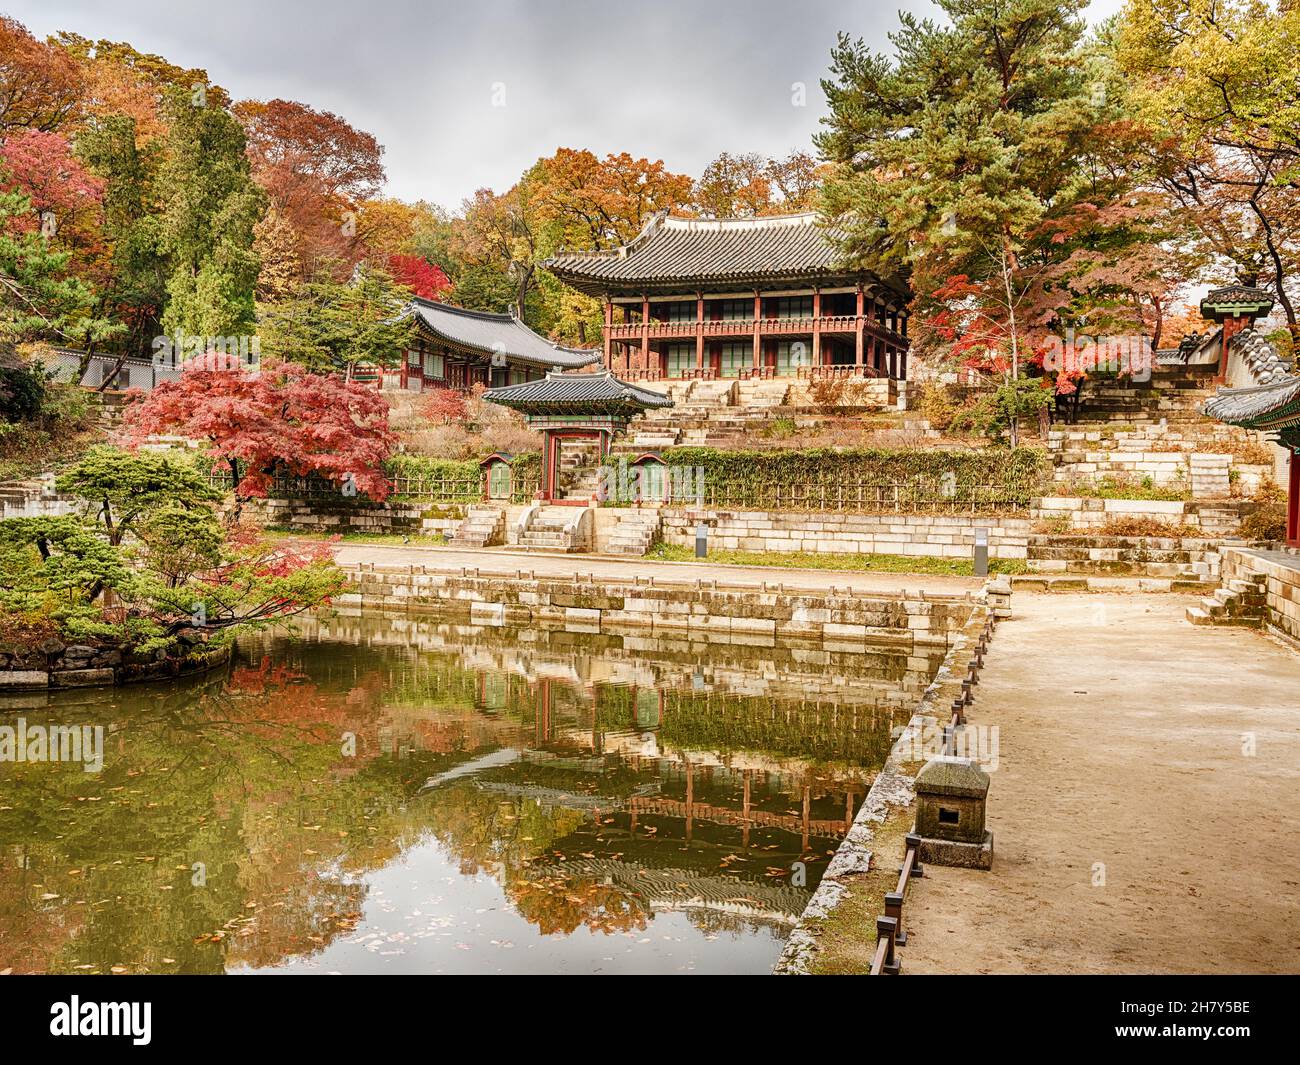 The emperor's library in the secret garden of Changdeokgung has a view over a pond. Stock Photo